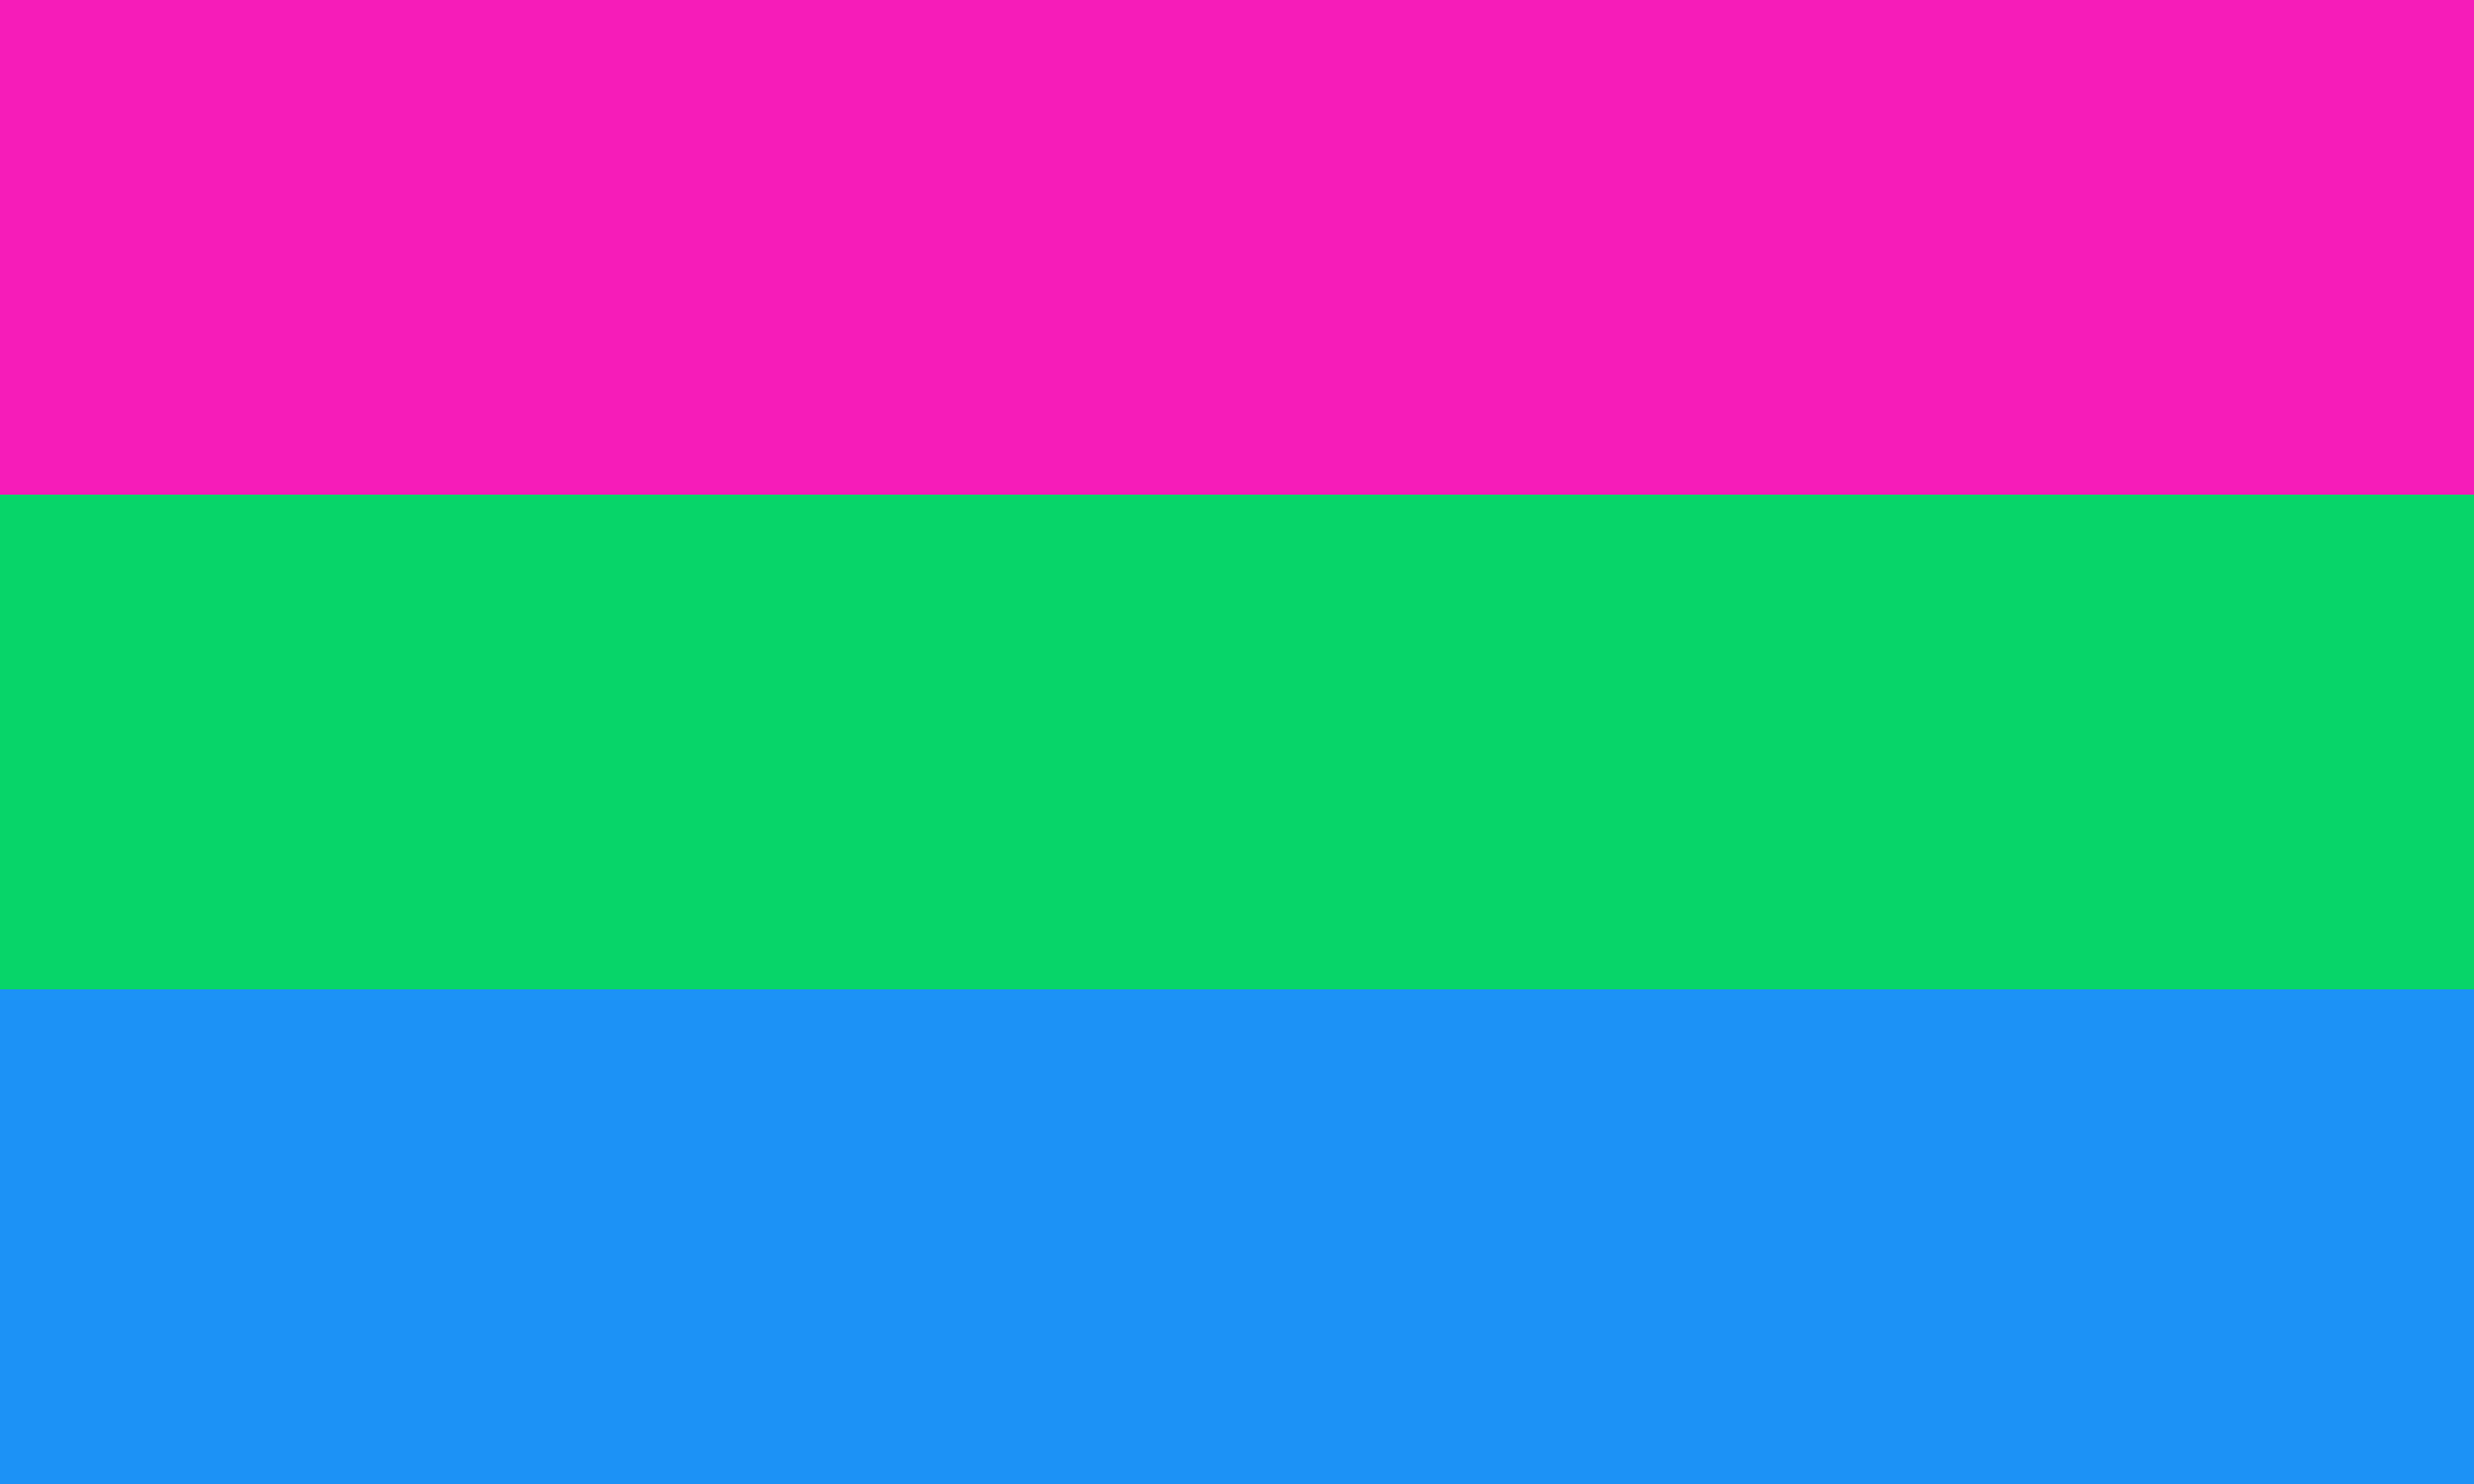 poly___1__by_pride_flags-d8zu7ww.png